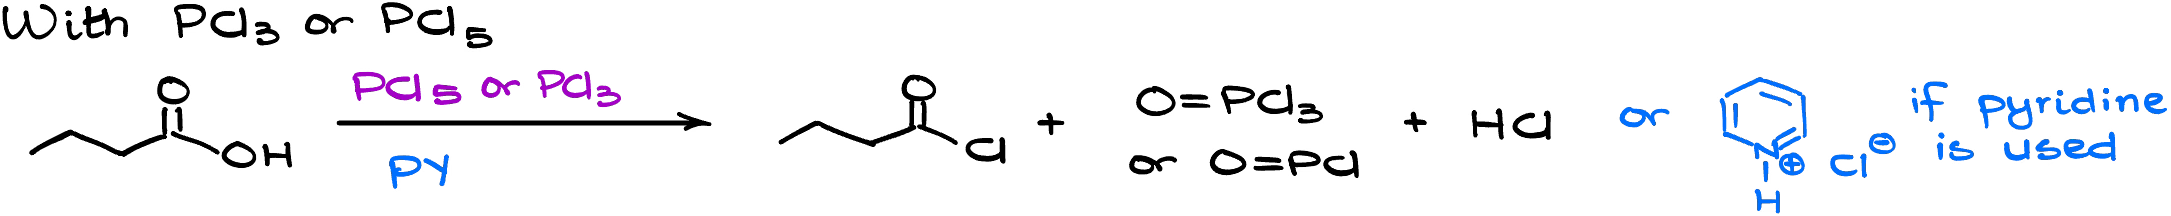 formation of acid chlorides with phosphorous chlorides